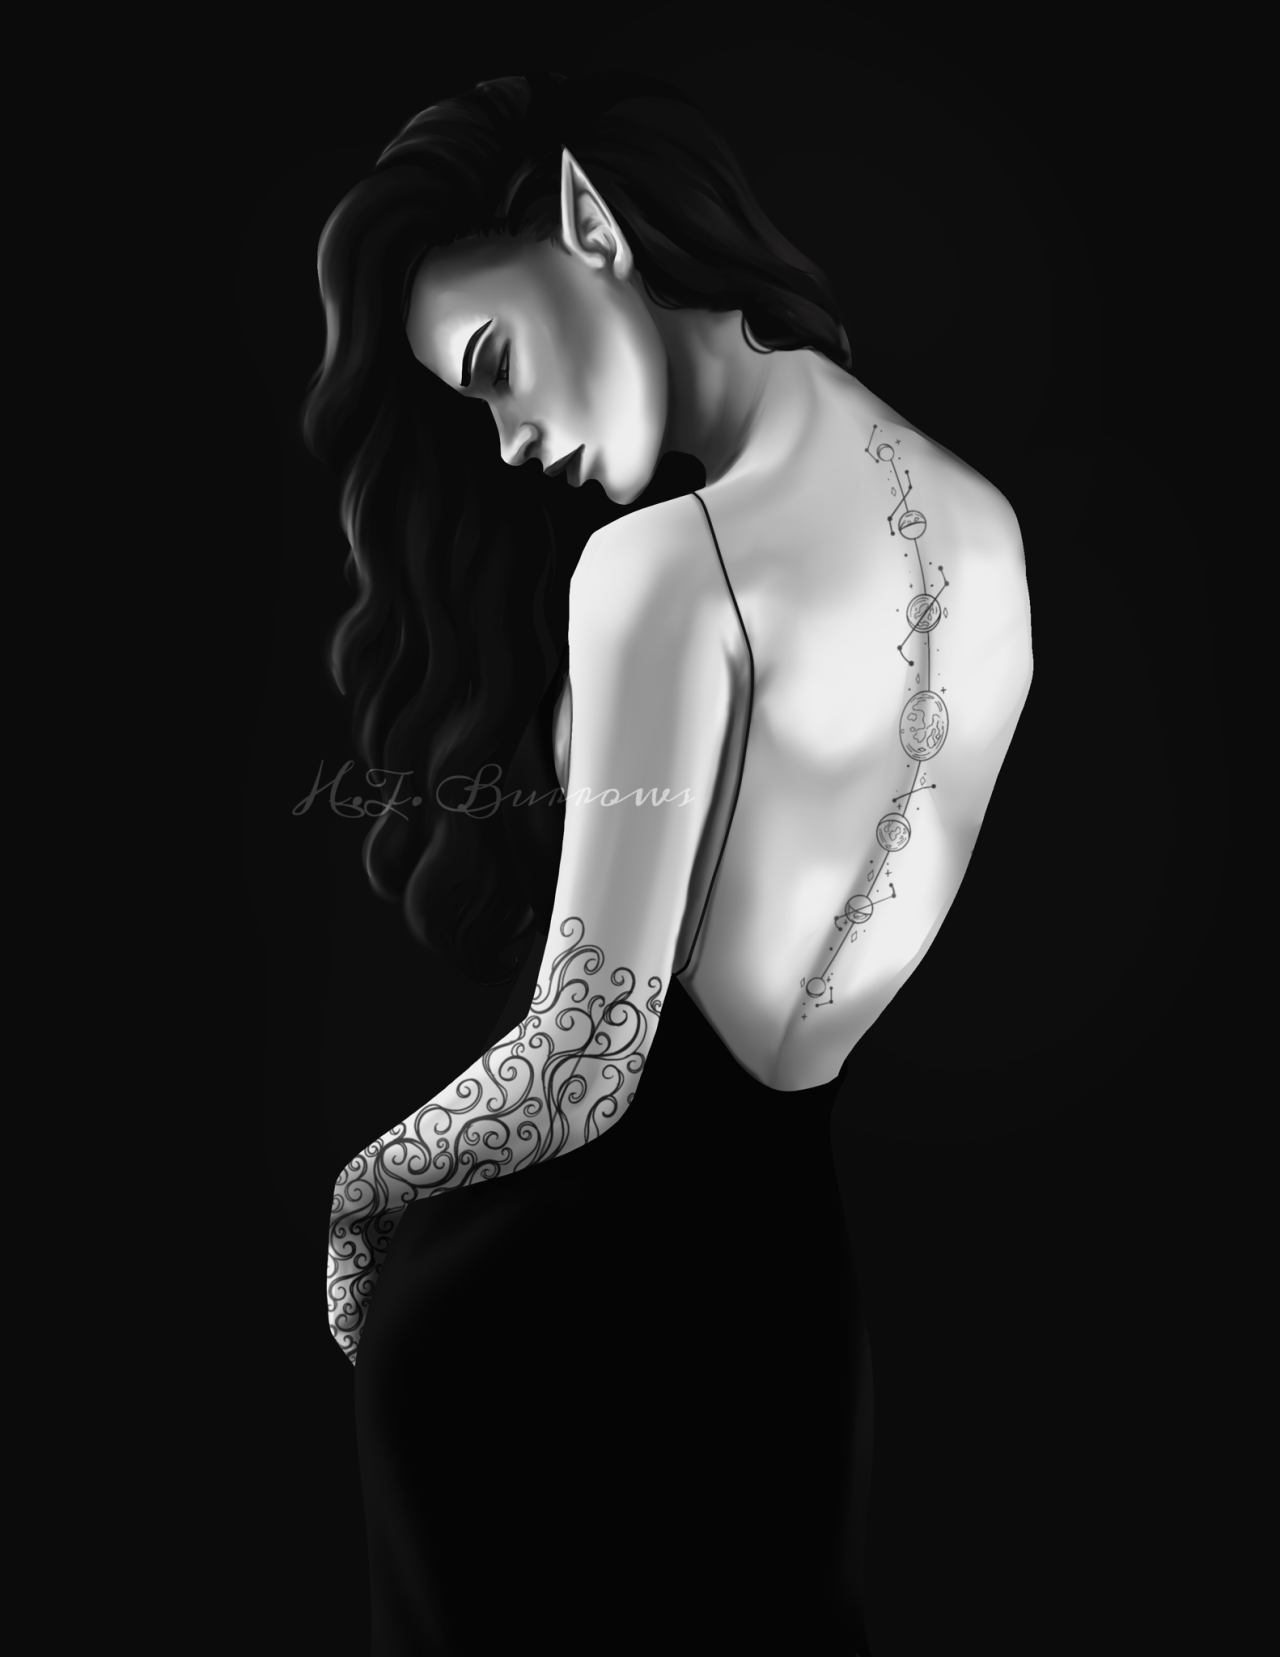 Feyres Tattoo by LilyLuxe on DeviantArt